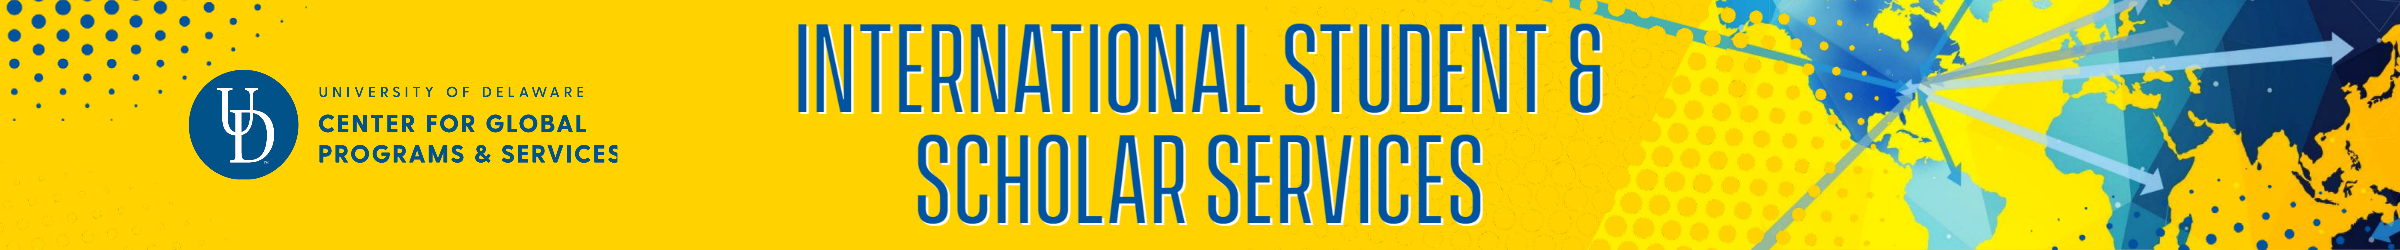 International Student and Scholar Services - University of Delaware